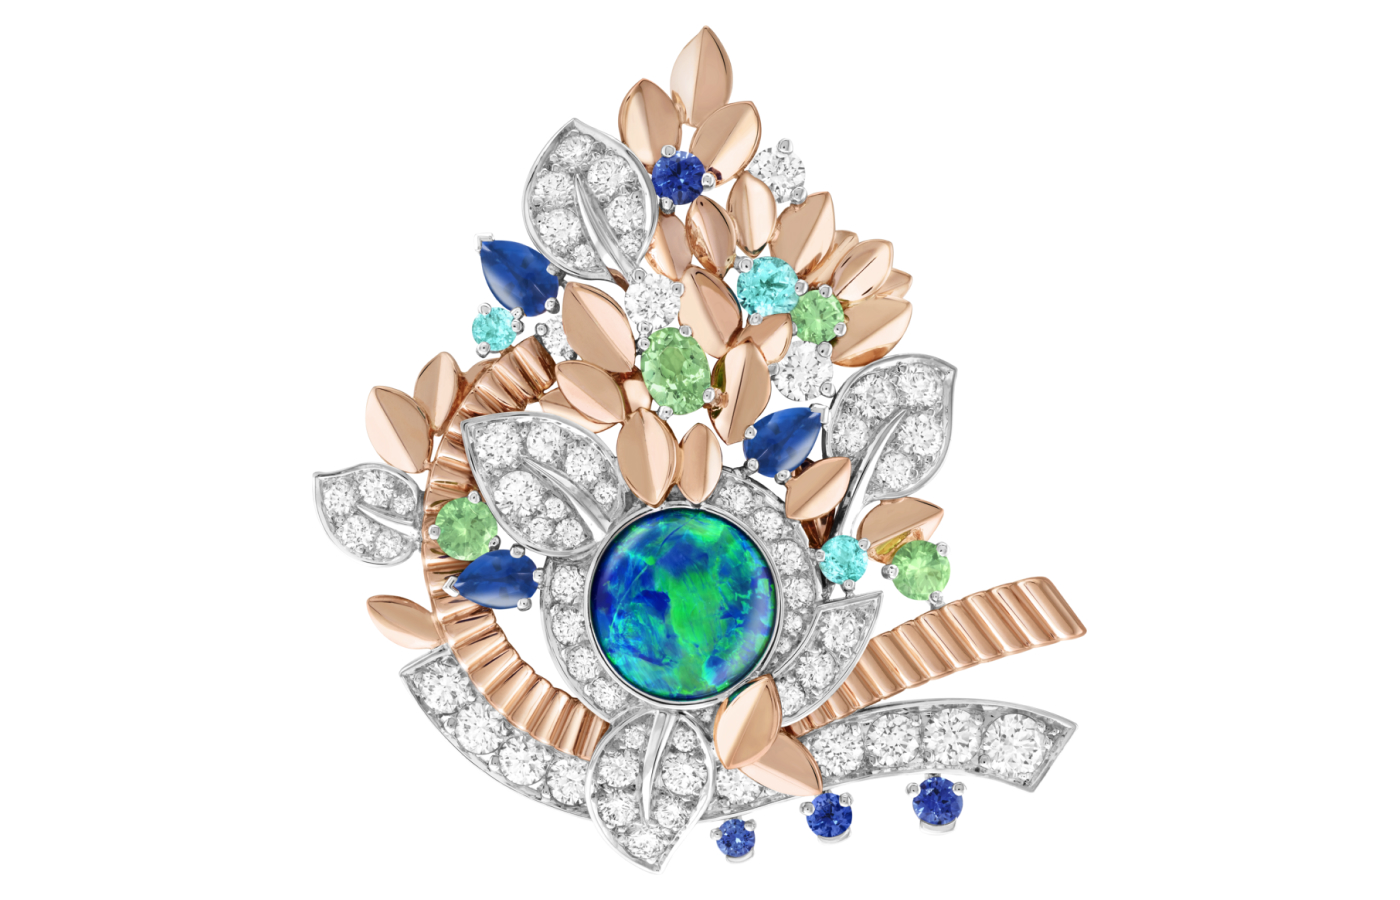 Van Cleef & Arpels Symphonie de l’eau clip in white gold, rose gold, featuring a 5.88-ct cabochon black opal, sapphires, tsavorite garnets, green tourmalines and diamonds from Le Grand Tour collection